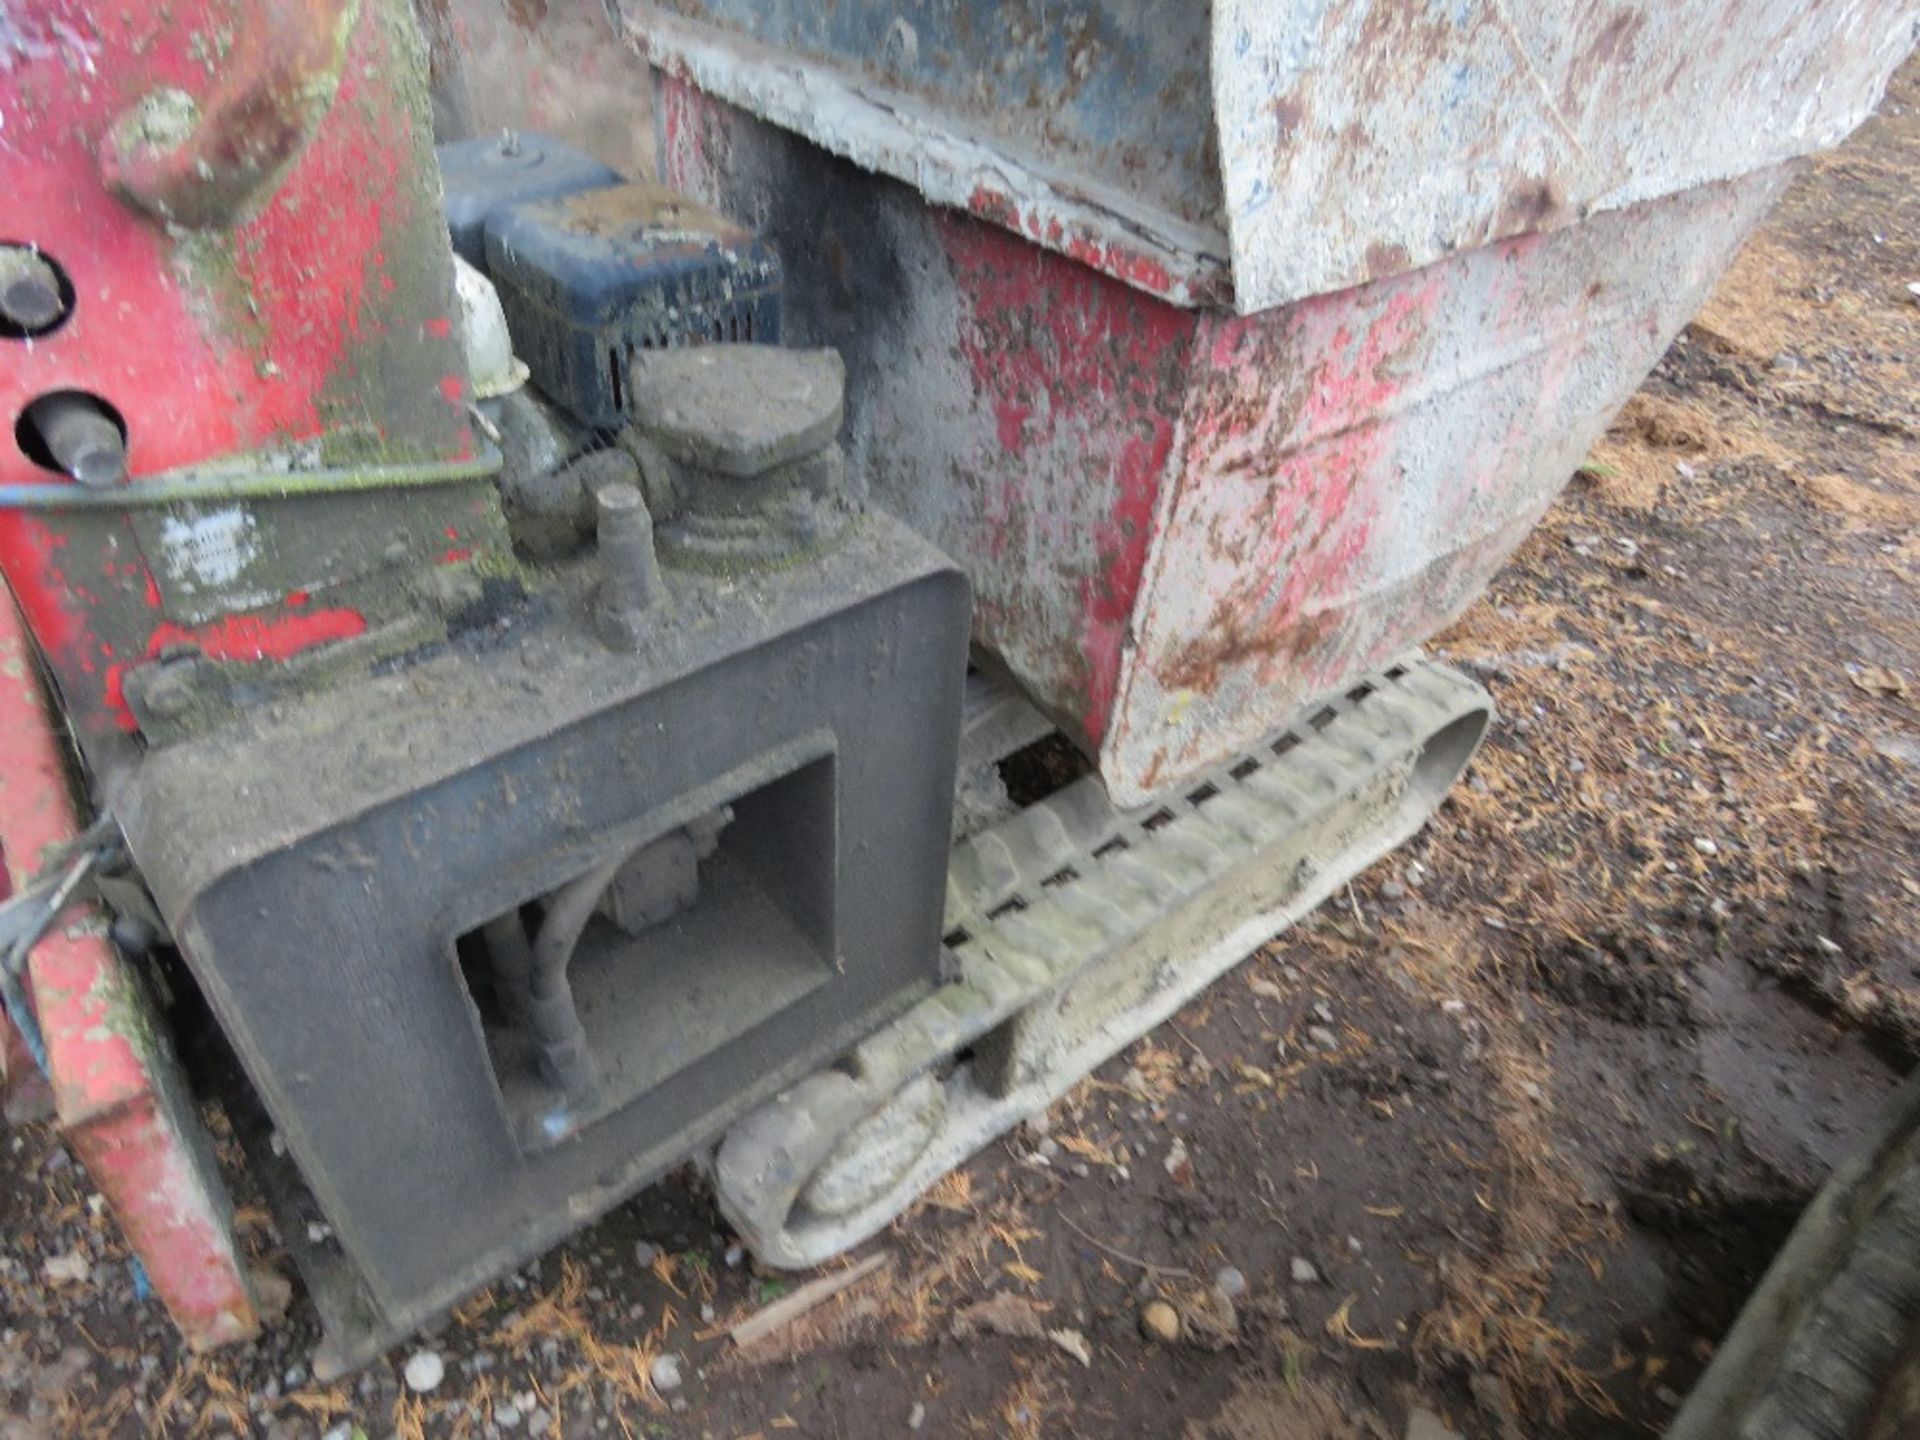 HINOWA HP800 PETROL ENGINED TRACKED DUMPER. BEEN STOOD FOR SOME TIME, UNTESTED, MAY REQUIRE ATTENTI - Image 3 of 4